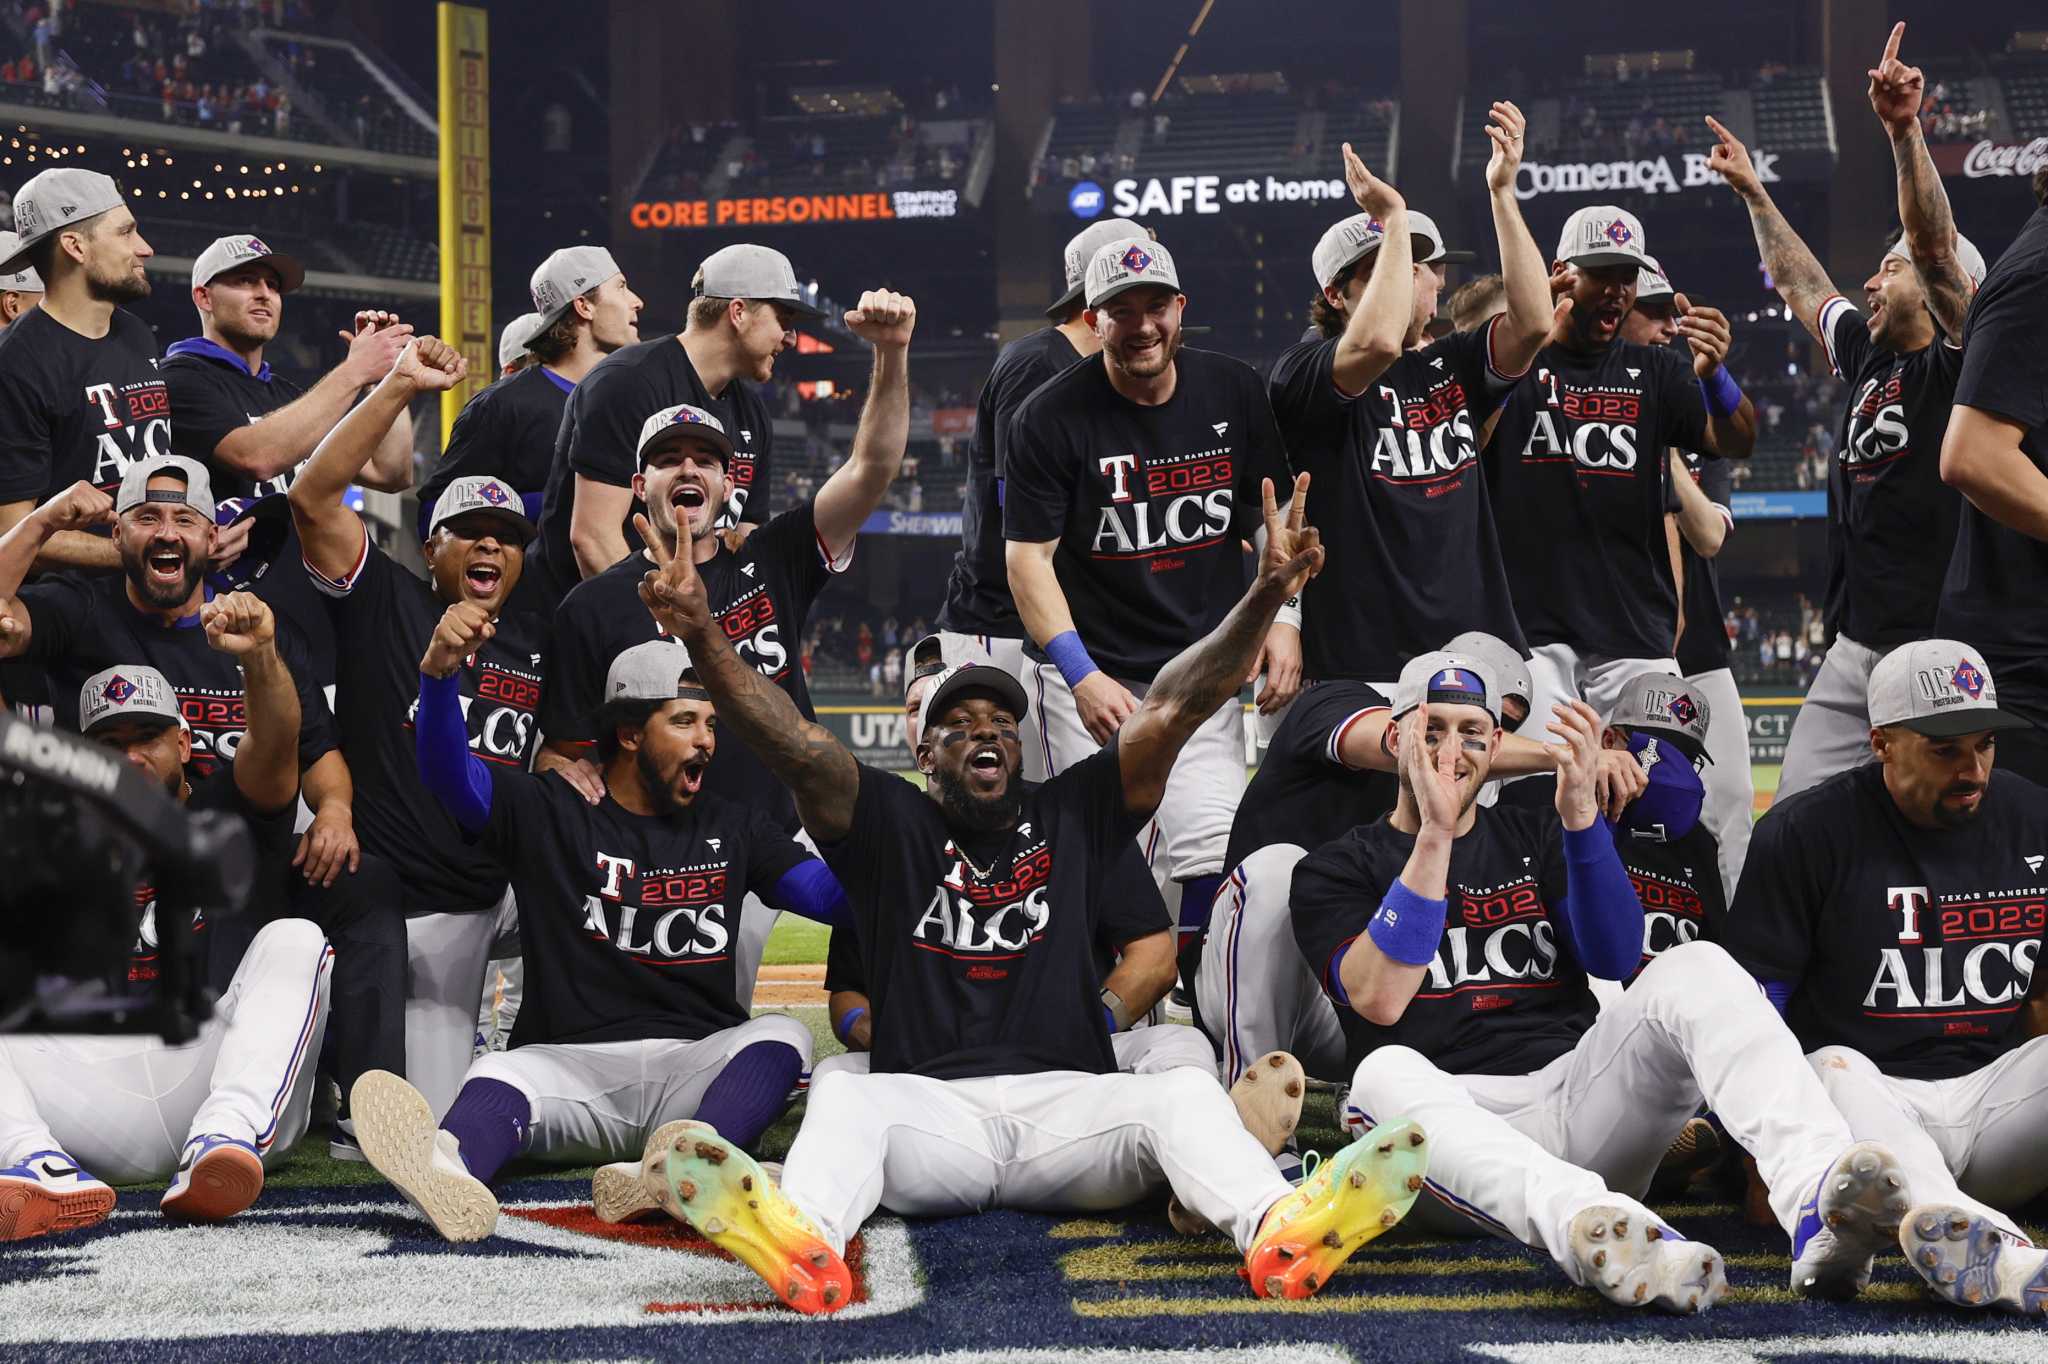 Rangers-Astros in the ALCS?: Texas players not ready to talk Houston